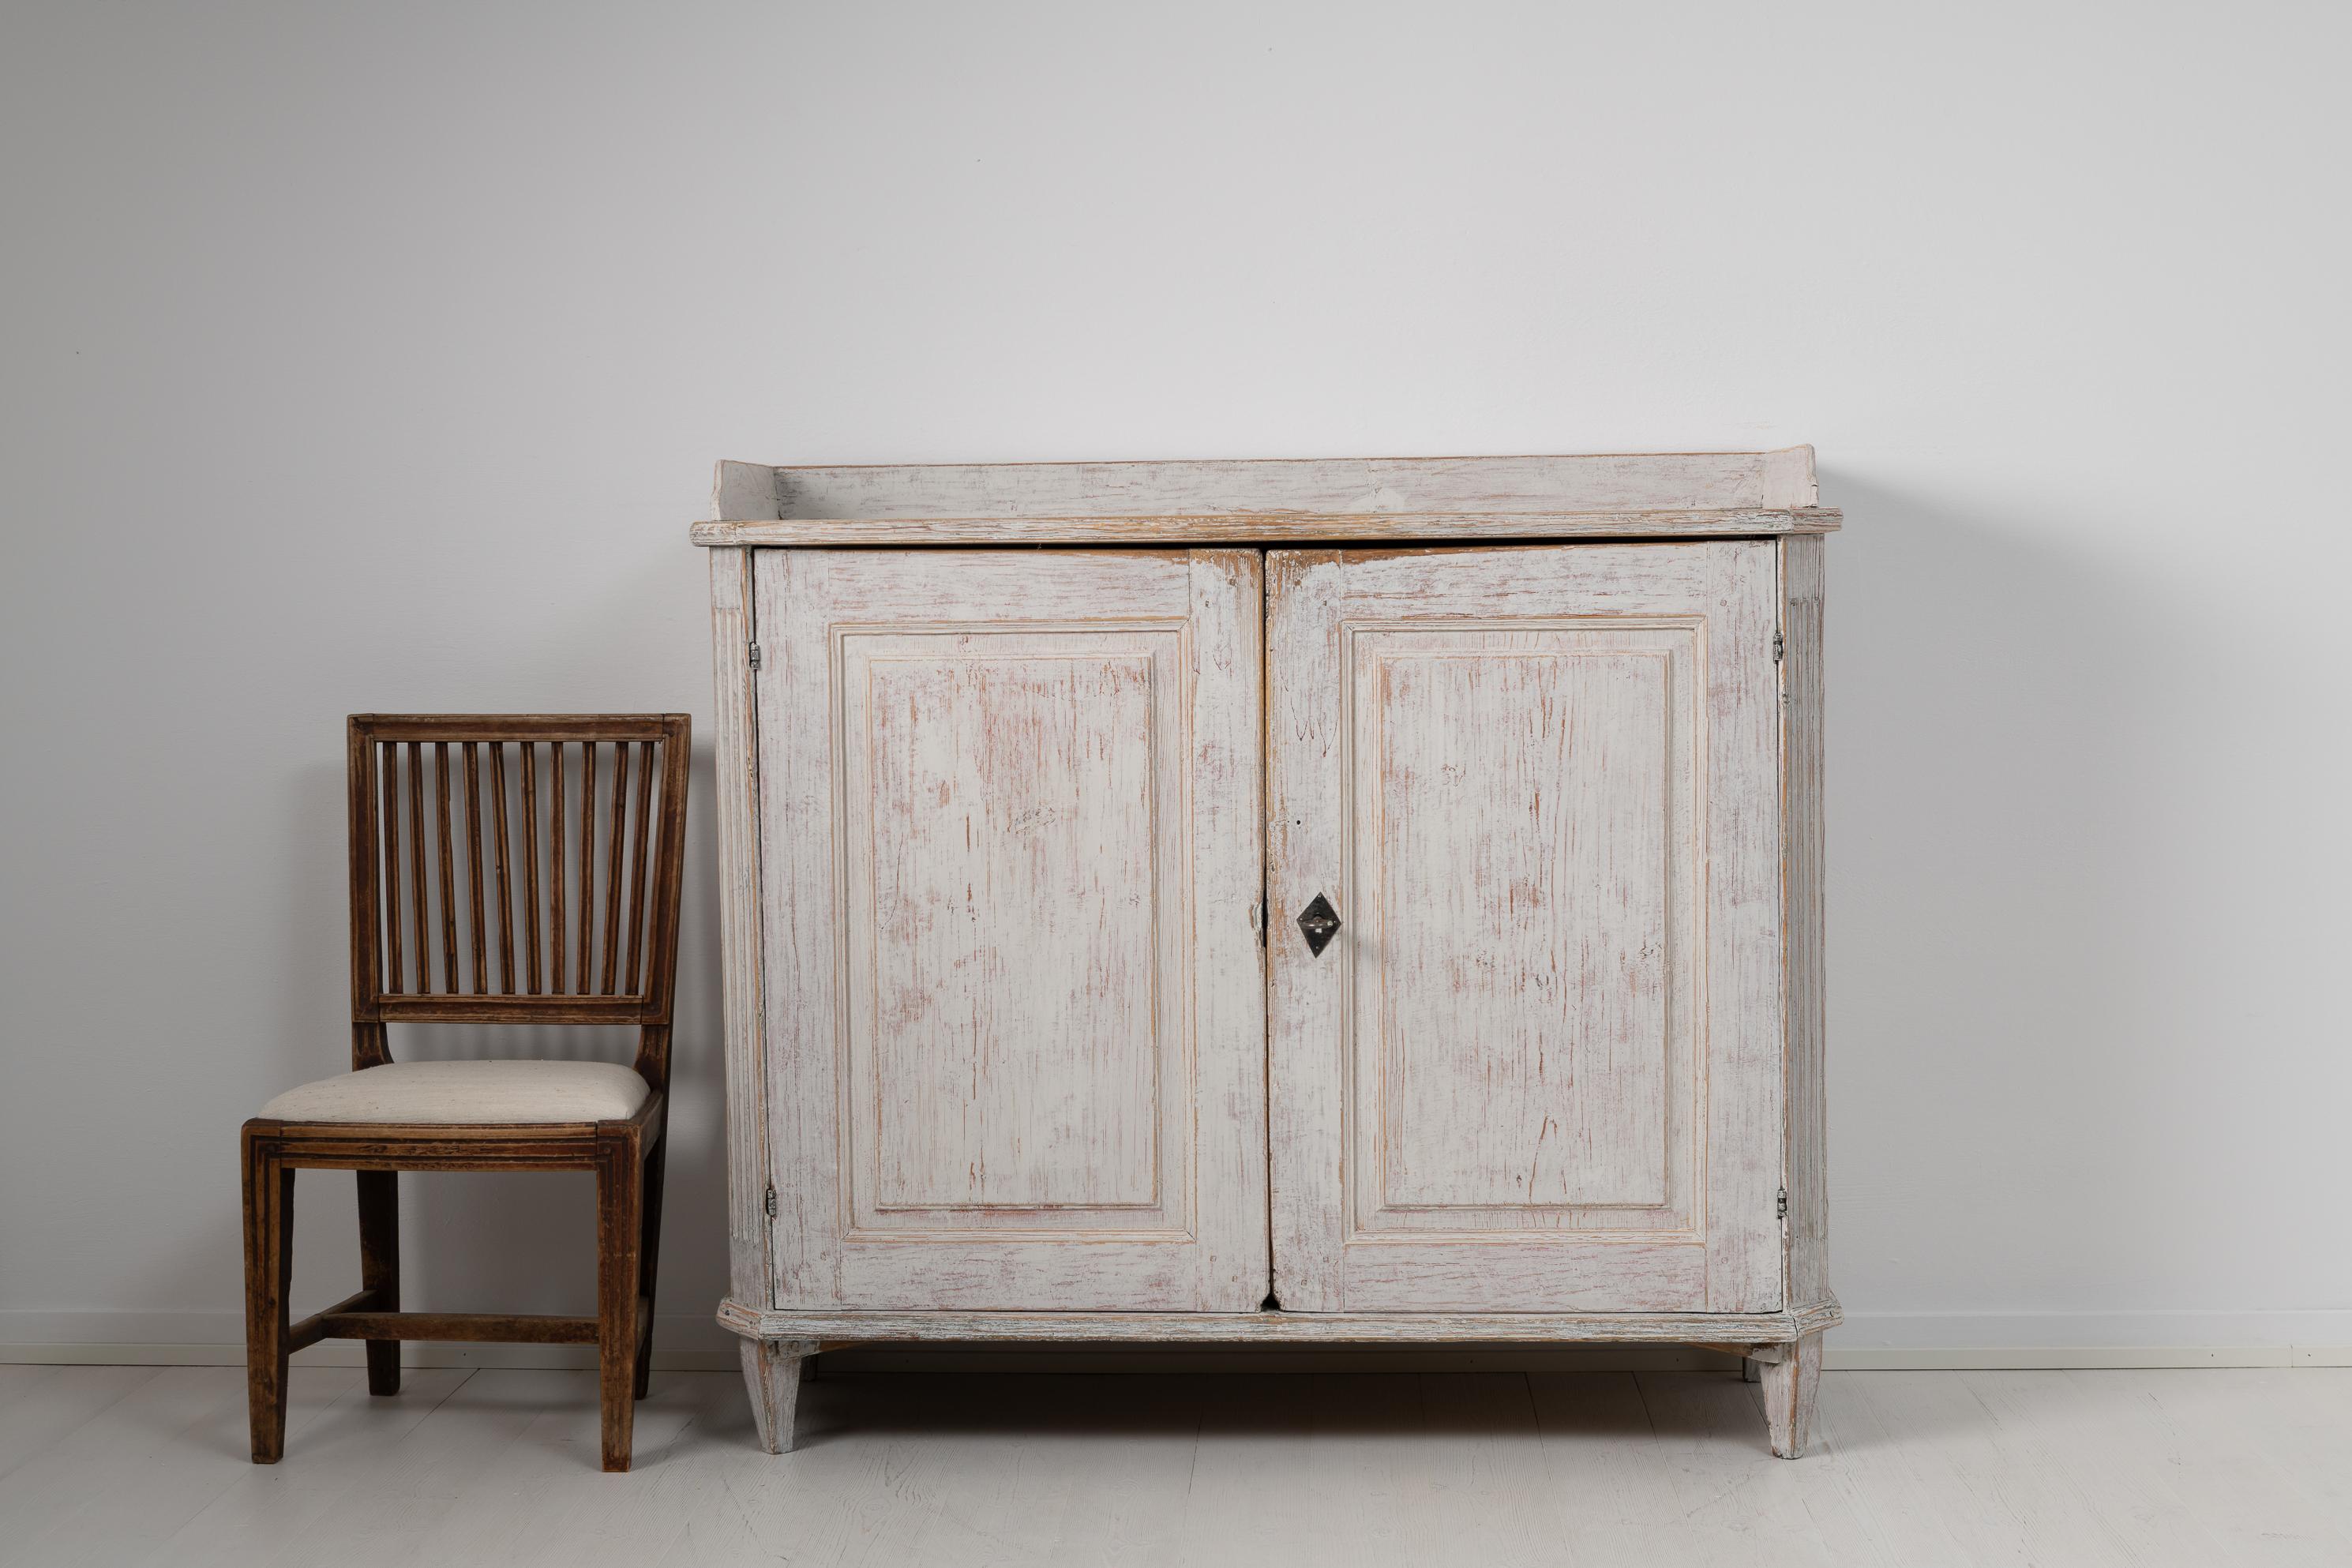 Northern Swedish white country home gustavian neoclassical sideboard. The sideboard is from the late 1700s and has a straight model with two doors. It has all the classic gustavian characteristics with angled corners with three flutes and straight